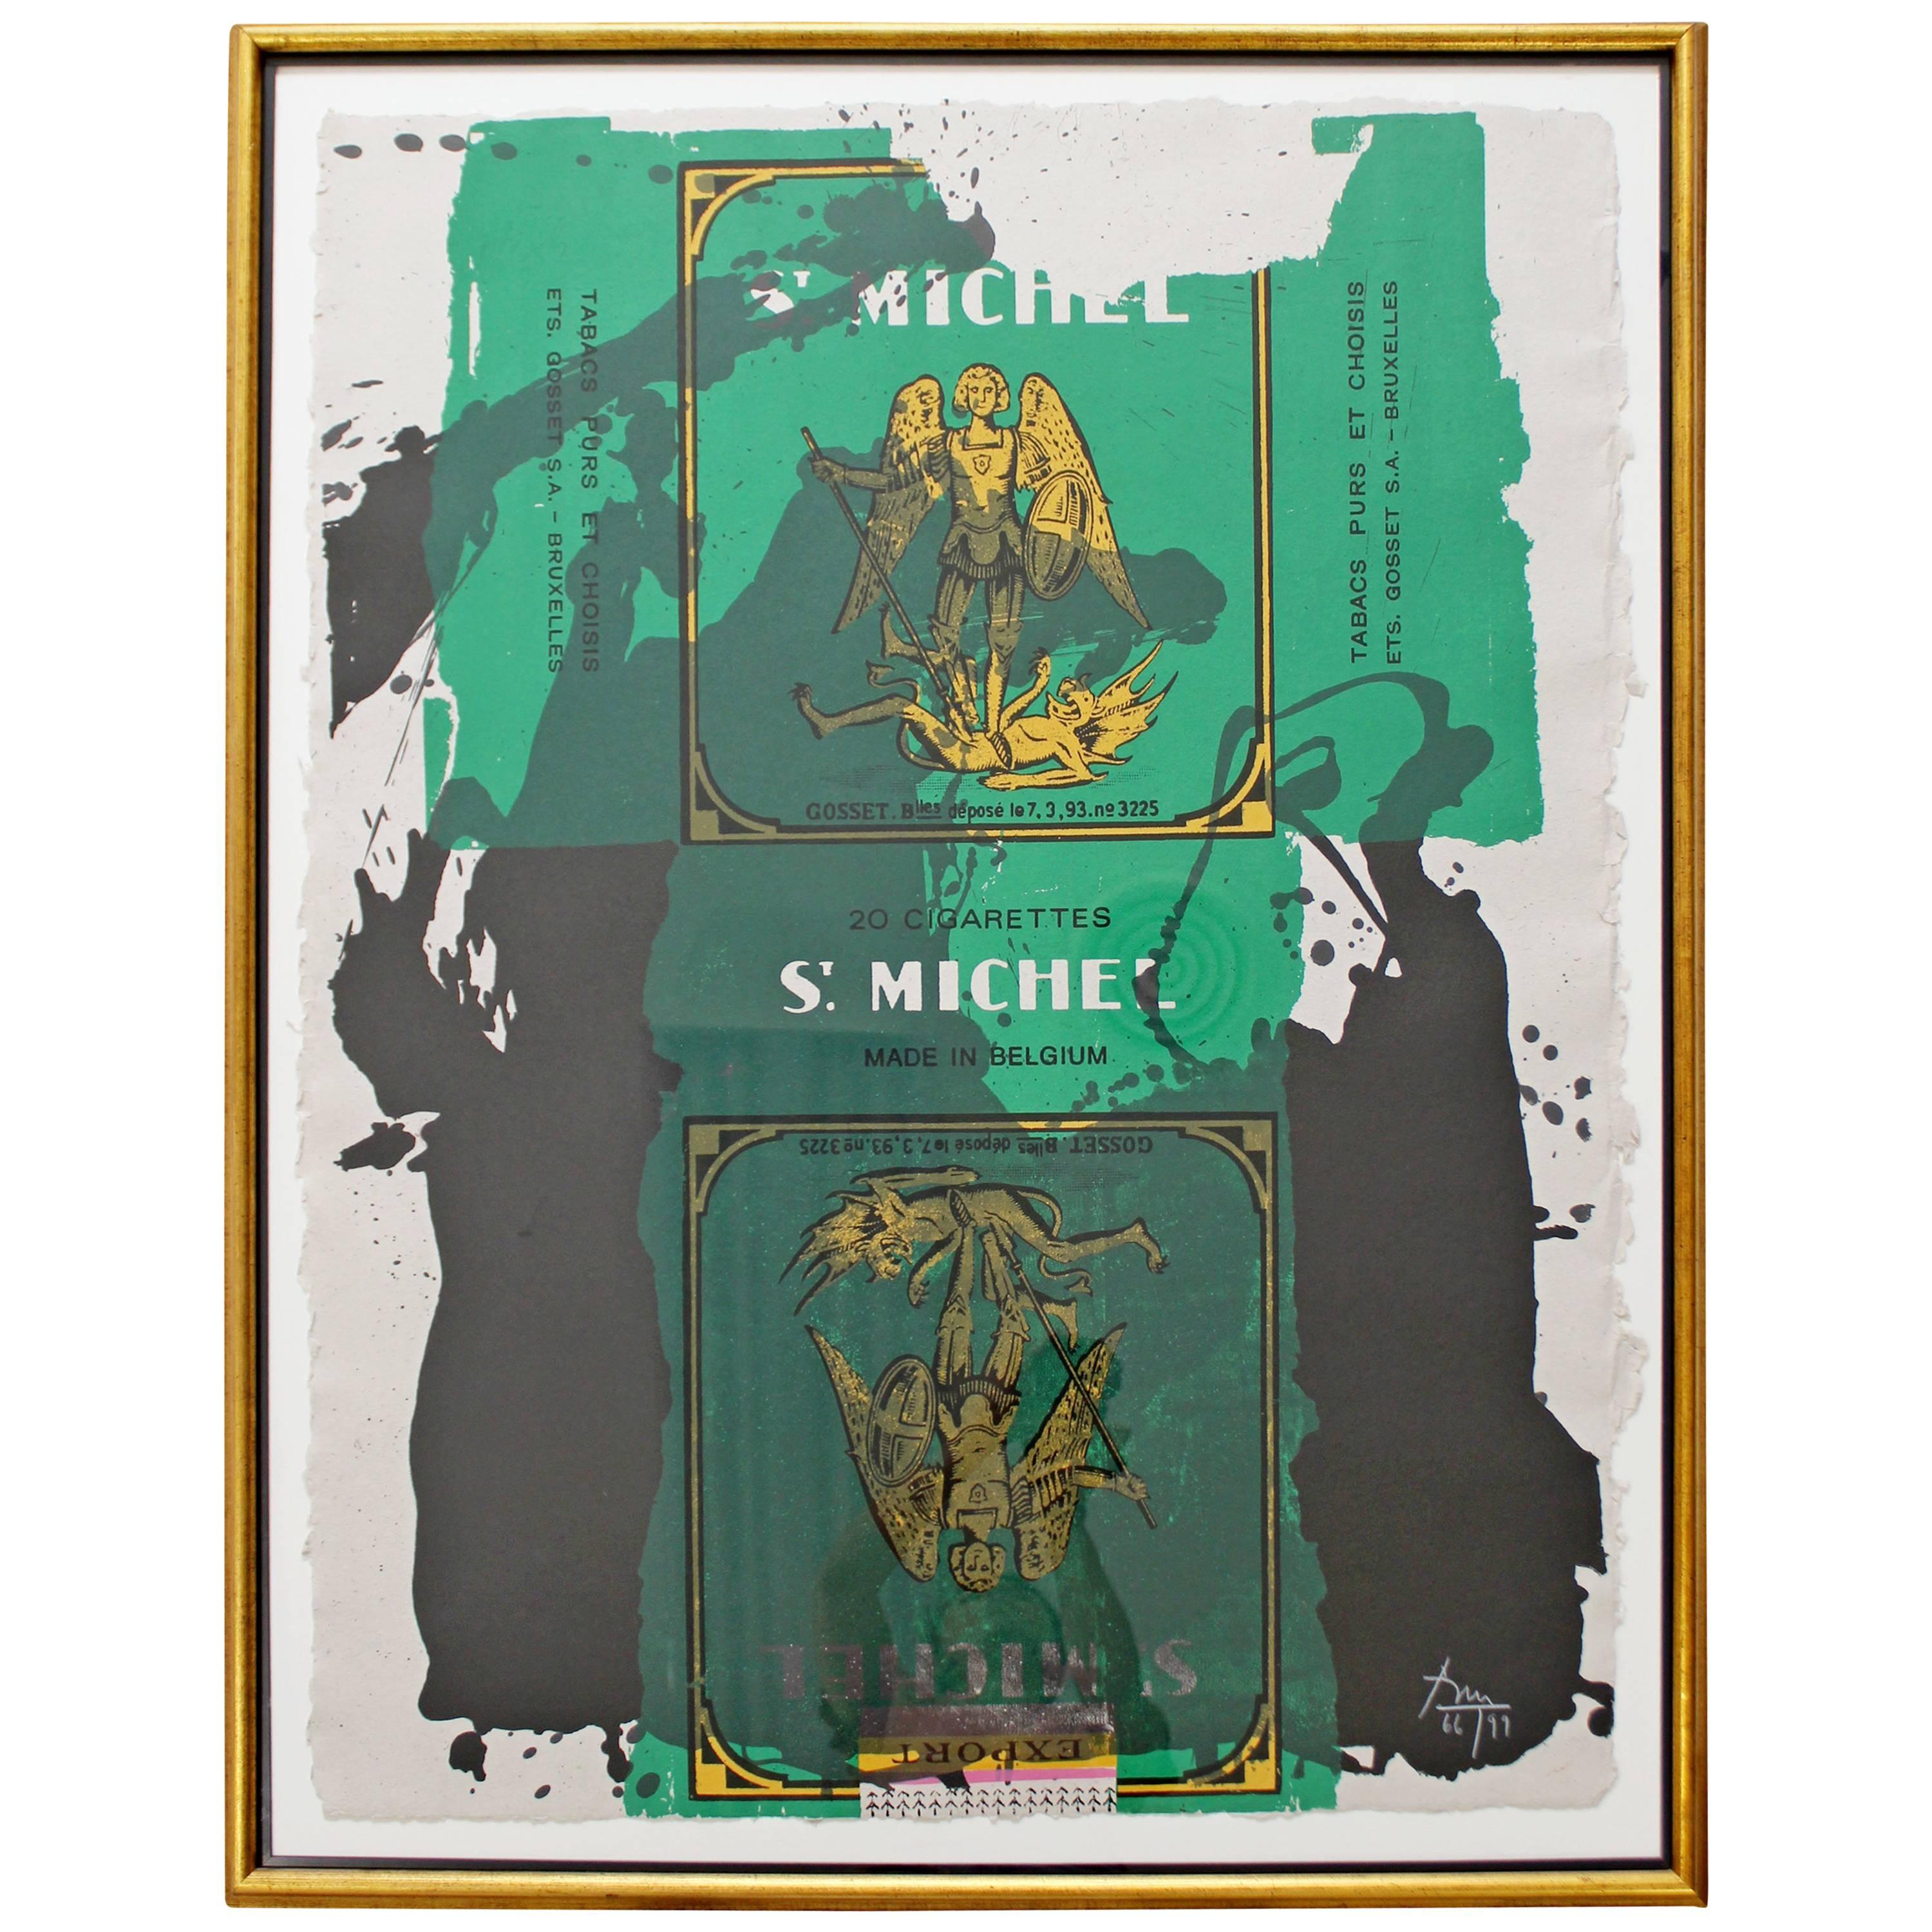 St Michael III Lithograph Screenprint Robert Motherwell Framed Signed Numbered